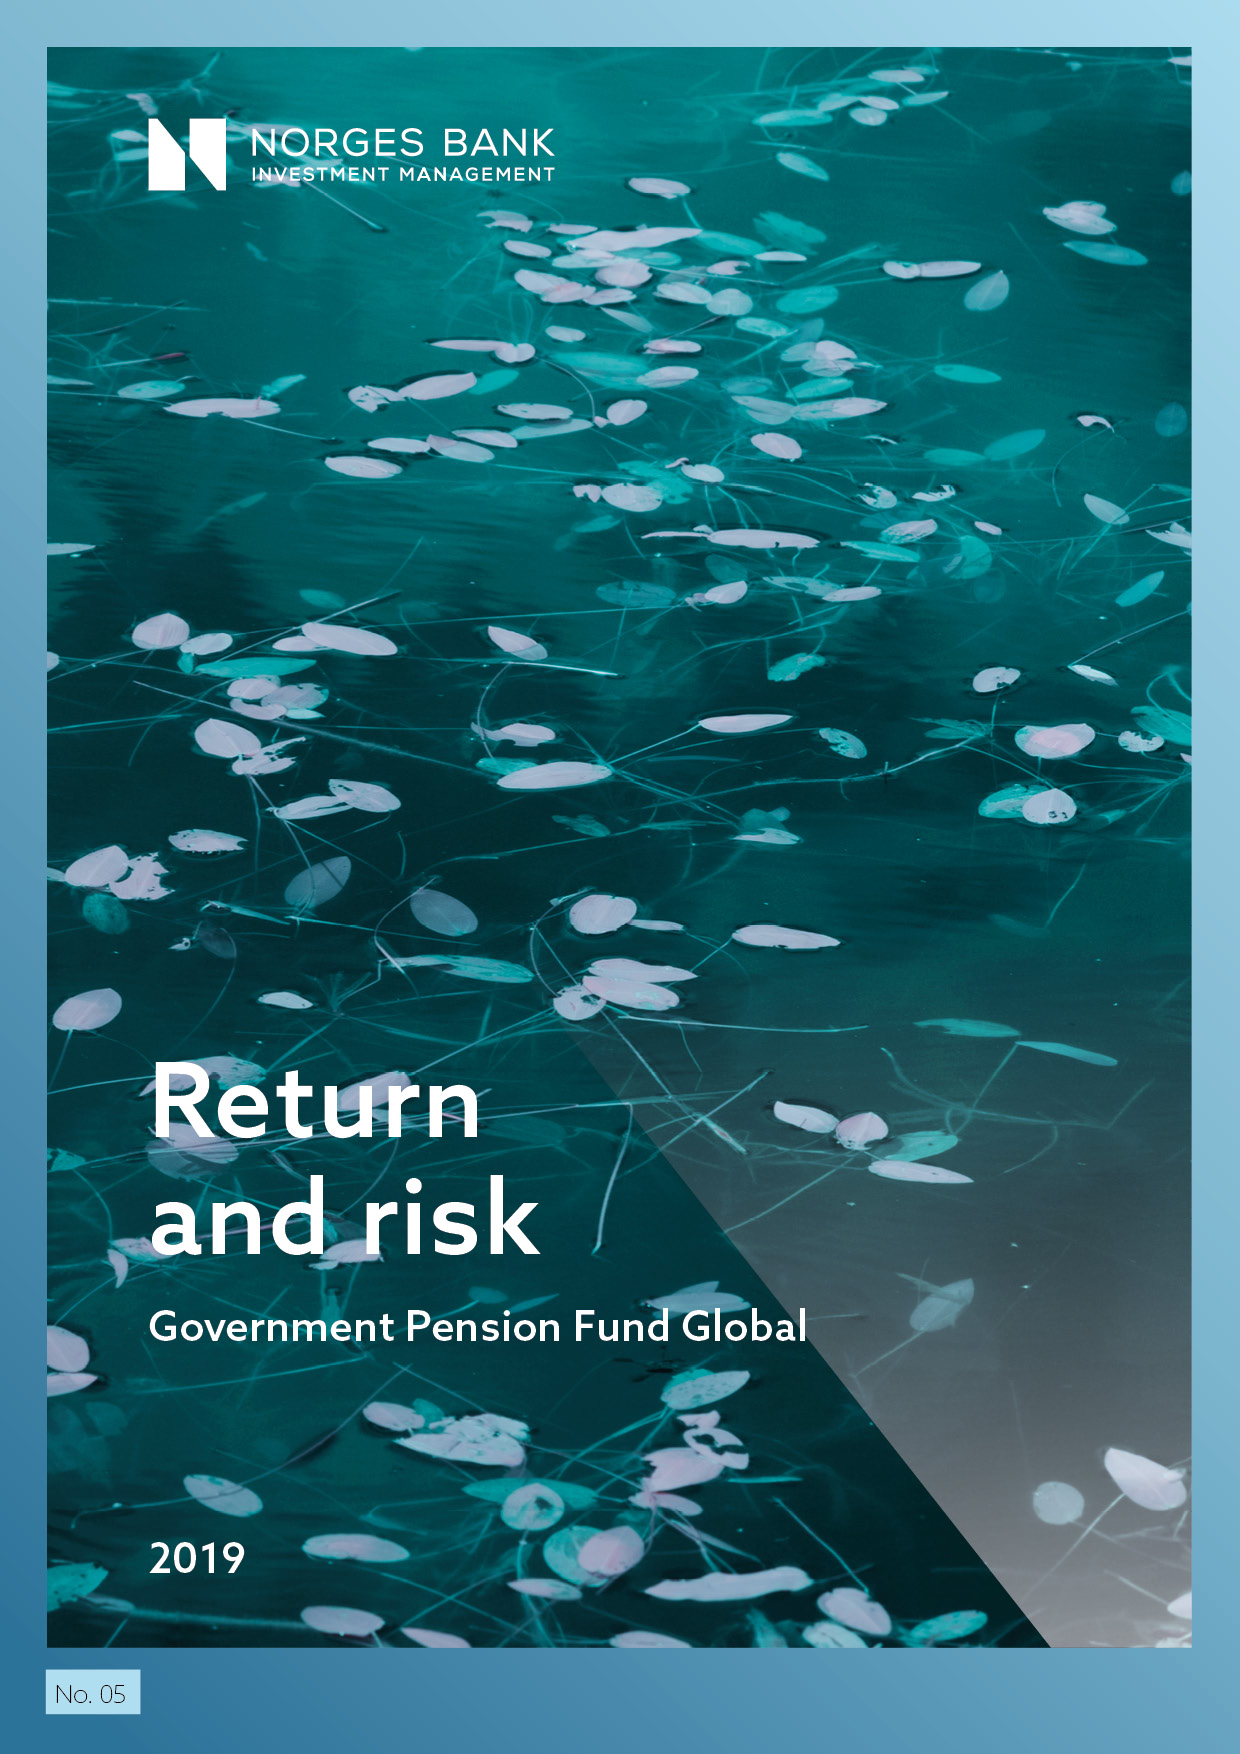 Extended information on return and risk